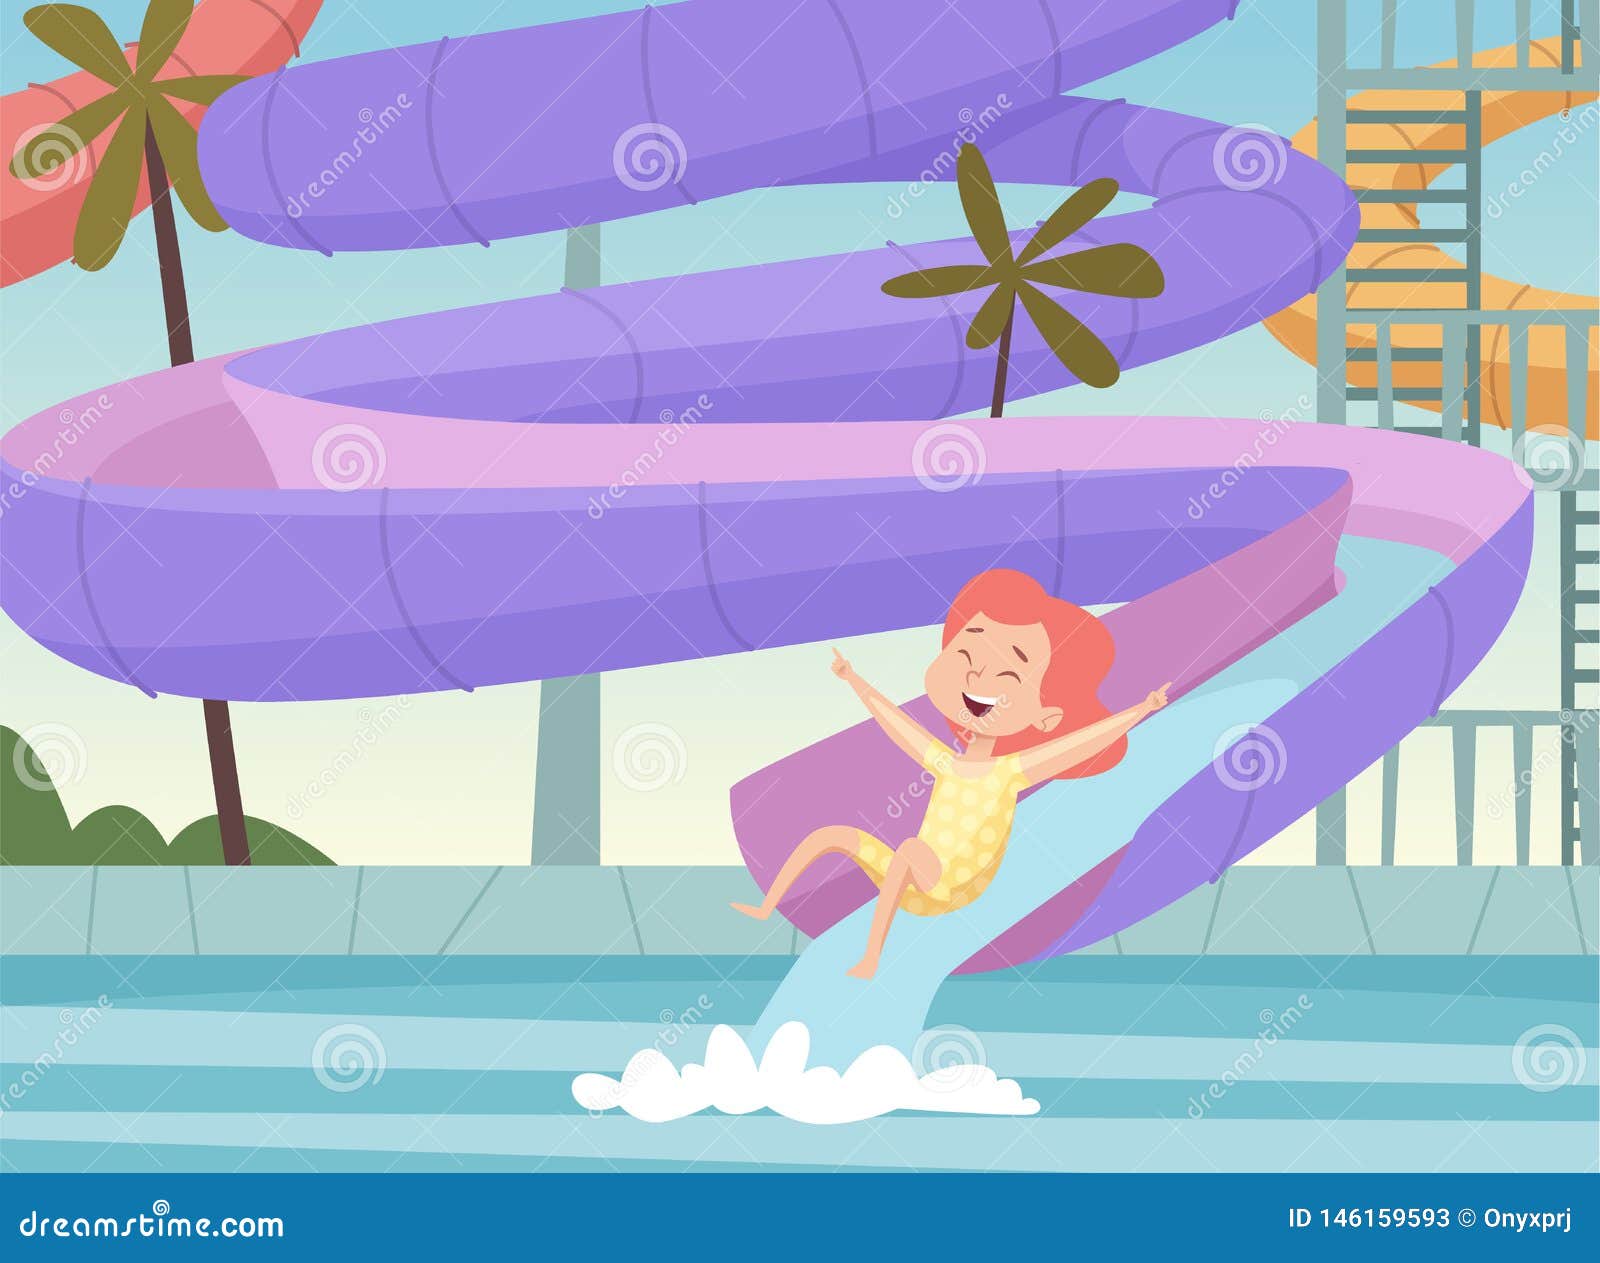 Water Park Background. Kids Jumping and Swimming in Urban Pool Outdoor  Attractions Fun in Aquapark Cartoon Vector Stock Vector - Illustration of  people, pastime: 146159593